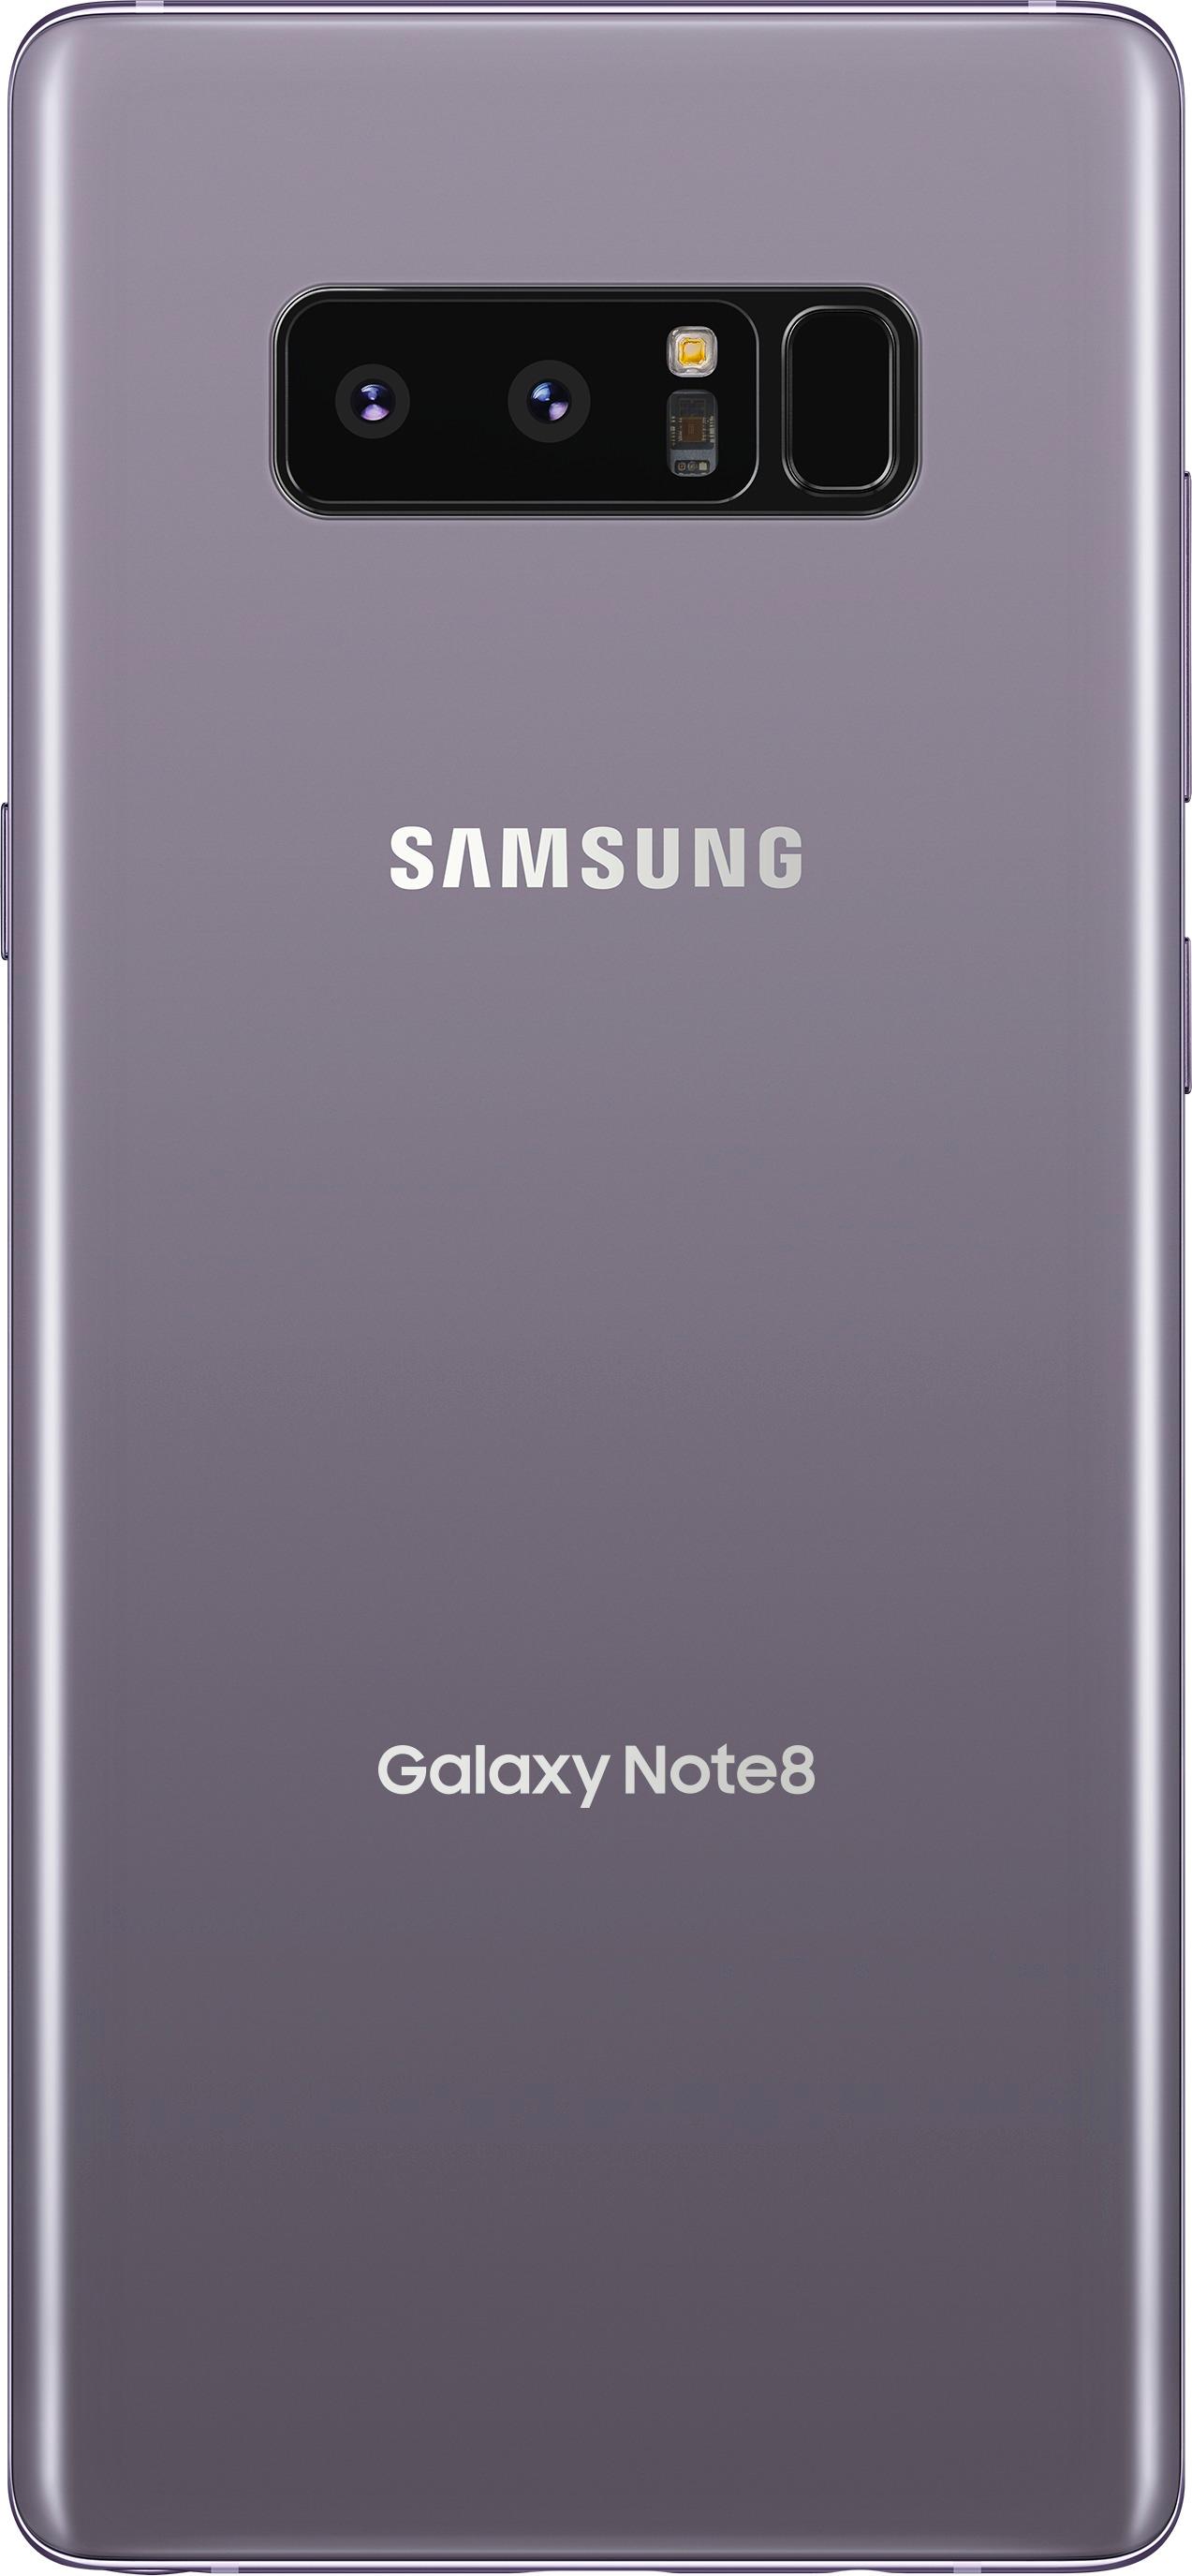 Back View: Samsung - Geek Squad Certified Refurbished Galaxy Note8 4G LTE with 64GB Memory Cell Phone (Unlocked) - Orchid Gray